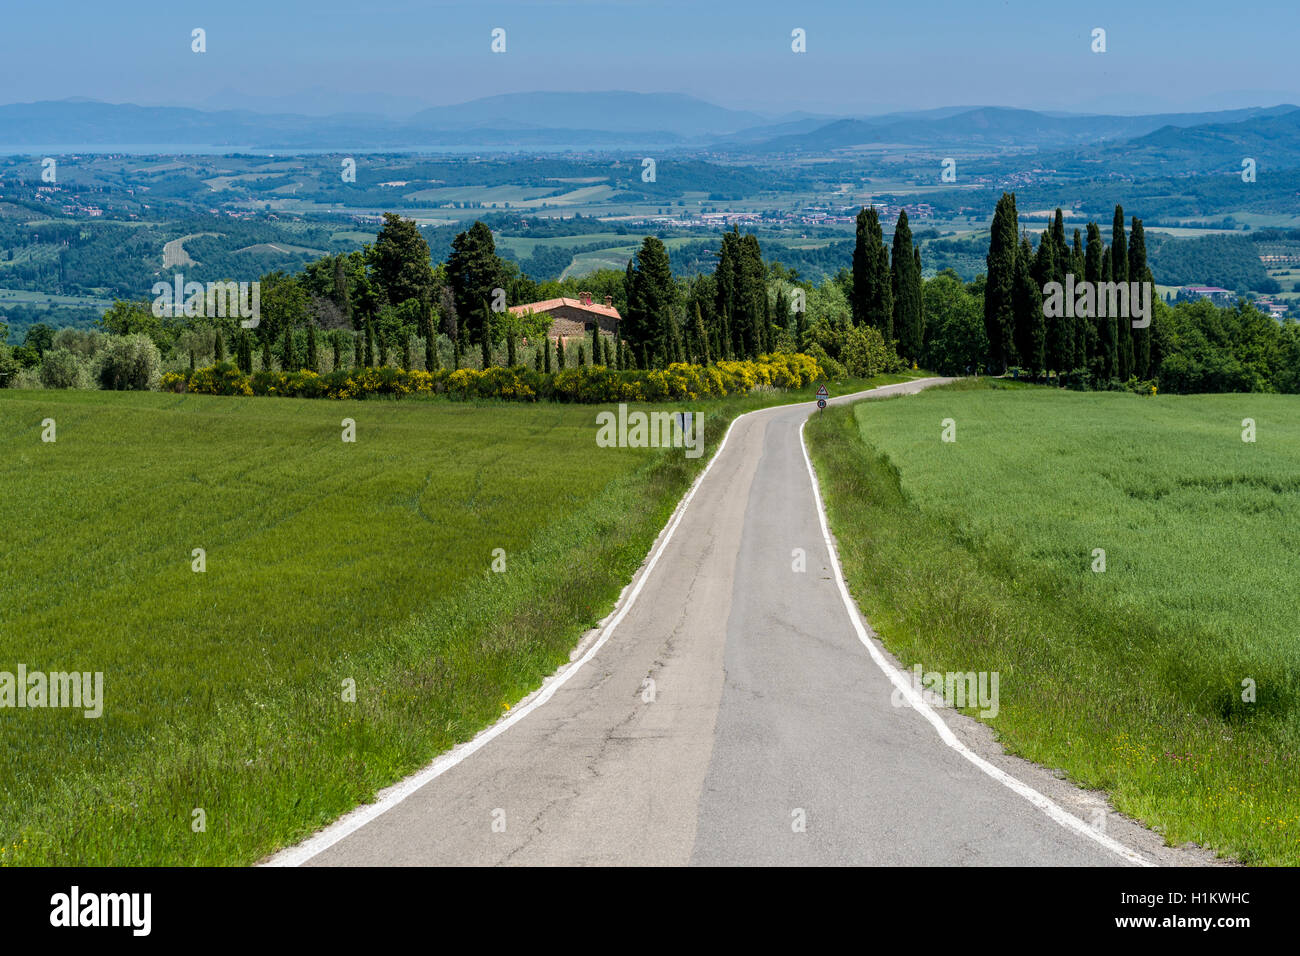 Typical green Tuscany landscape with hills, trees, a road leading to a farm and blue sky, San Casciano dei Bagni, Tuscany, Italy Stock Photo